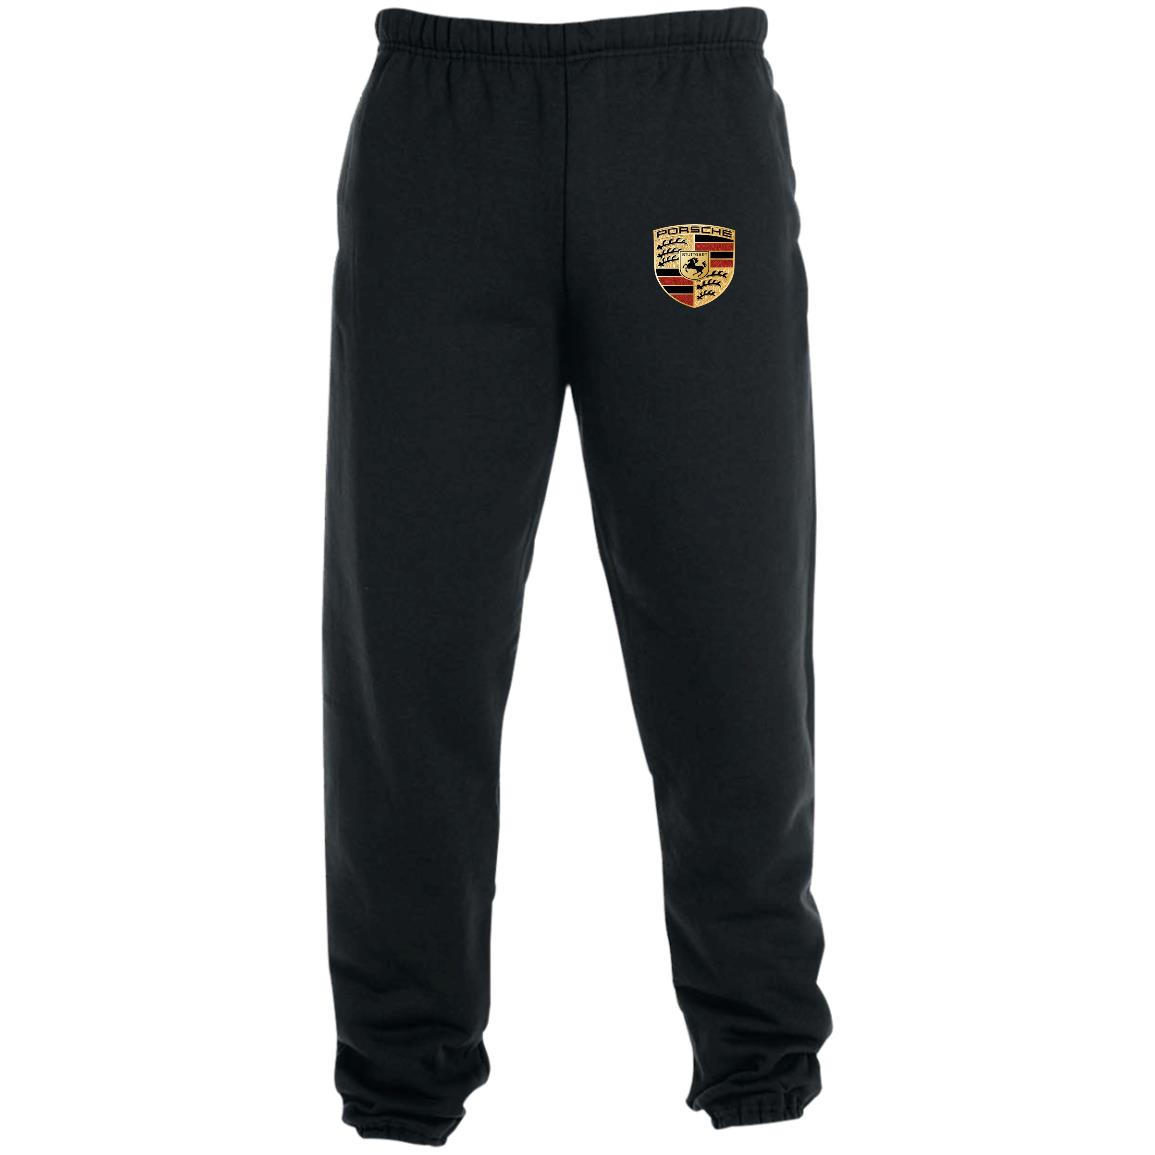 Porsche Sweatpants with Pockets - My Car My Rules